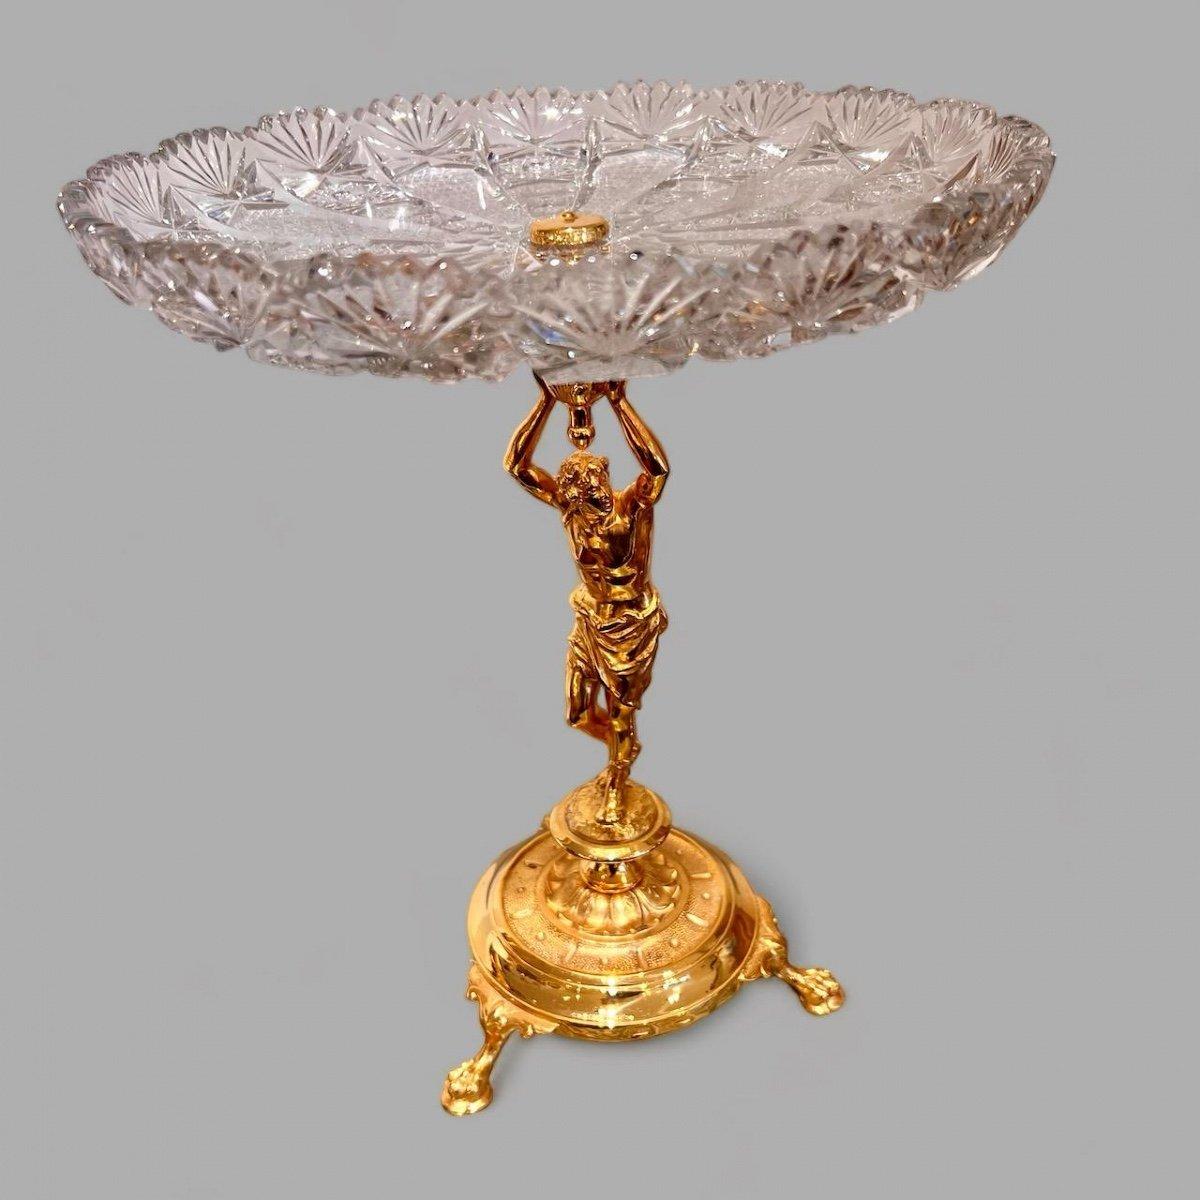 We present you with this exquisite decorative bowl made of cut crystal with a gilded bronze base from the Napoleon III period in the 19th century. The base depicts a man in classical ancient Greek attire holding the crystal coupe of the bowl at